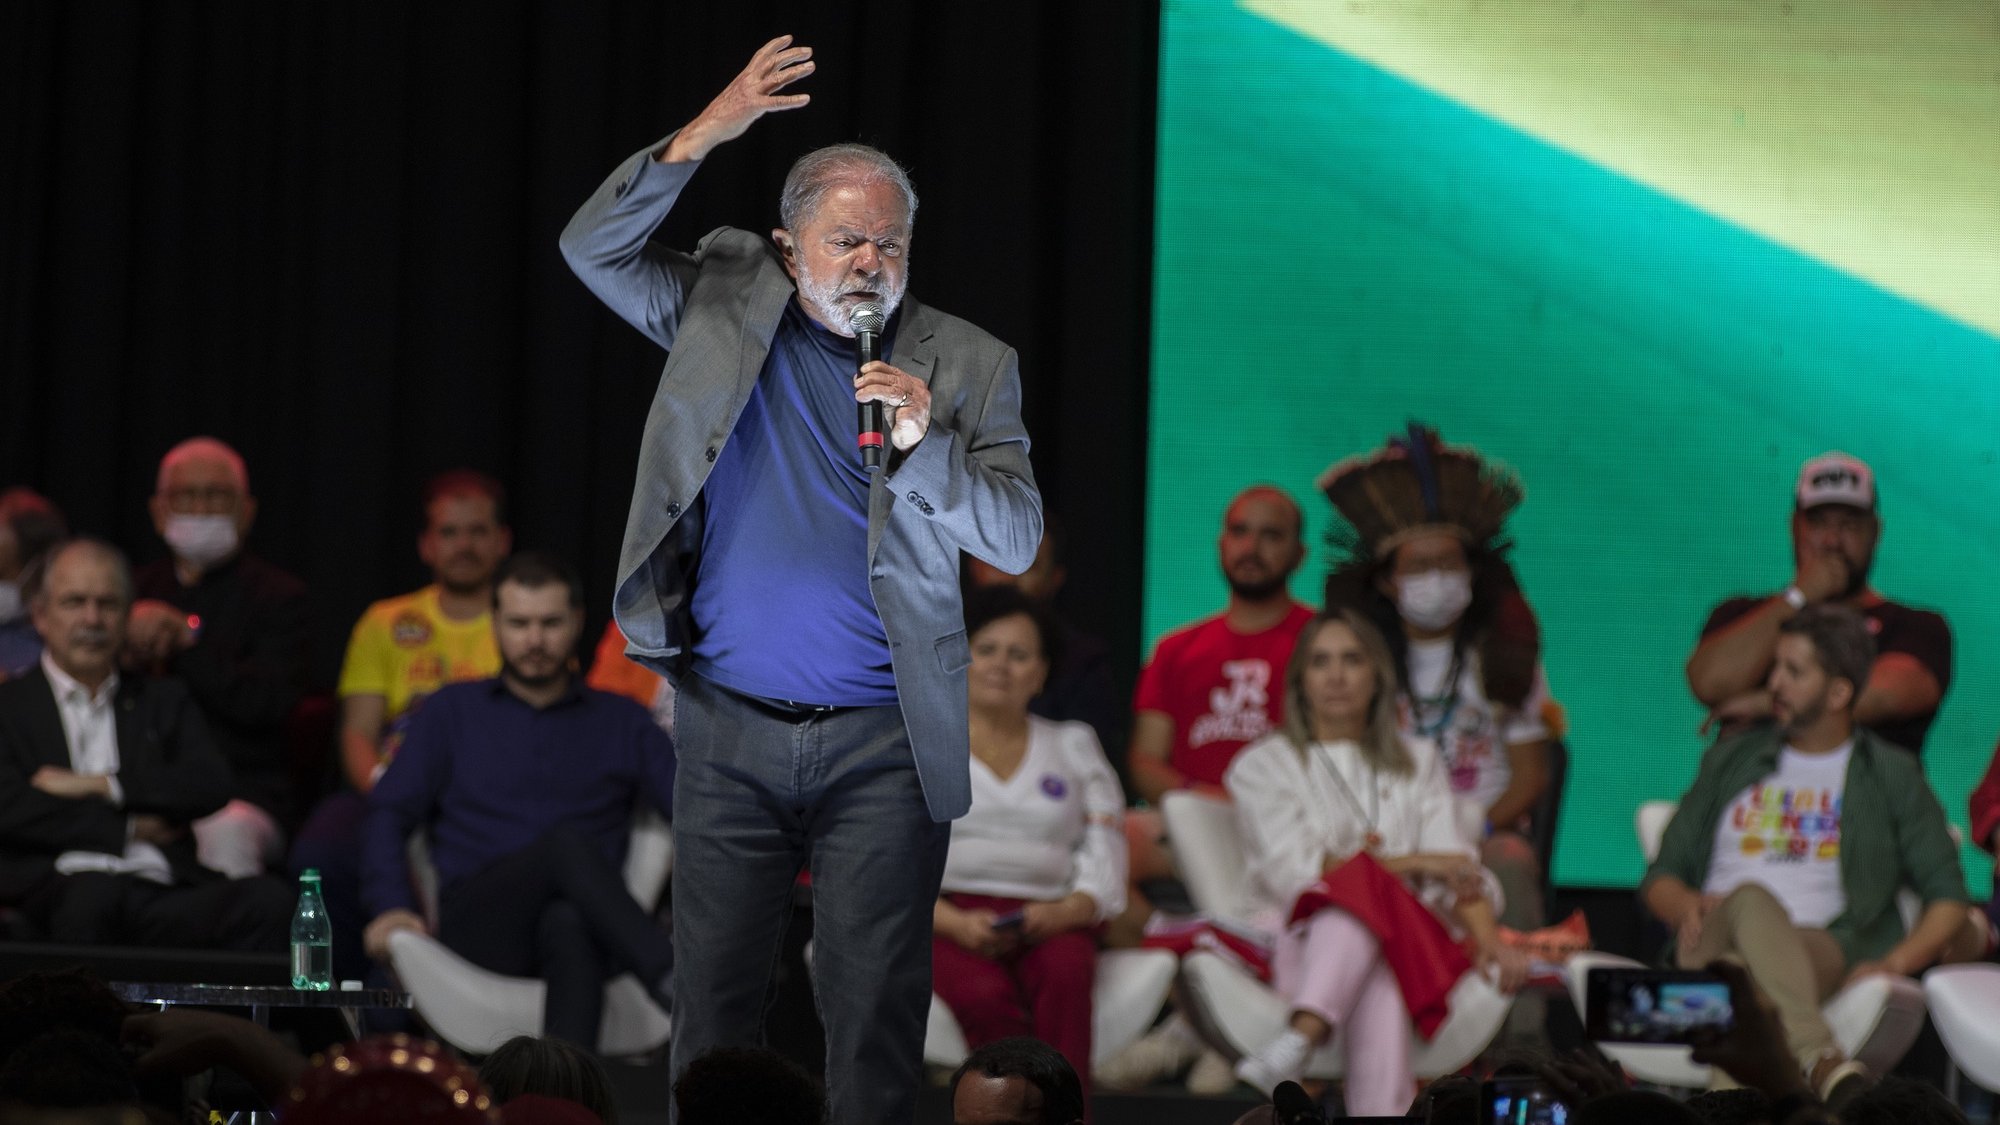 epa10067957 The former president of Brazil and candidate for the next elections, Luiz Inacio Lula da Silva, participates in the event titled &#039;Let&#039;s go together for Brazil&#039; in the city of Brasilia, Brazil, 12 July 2022. Former Brazilian President Luiz Inacio Lula da Silva asked his followers on Tuesday to avoid &#039;provocations&#039; by supporters of President Jair Bolsonaro, after the murder of a leftist militant.  EPA/Joedson Alves